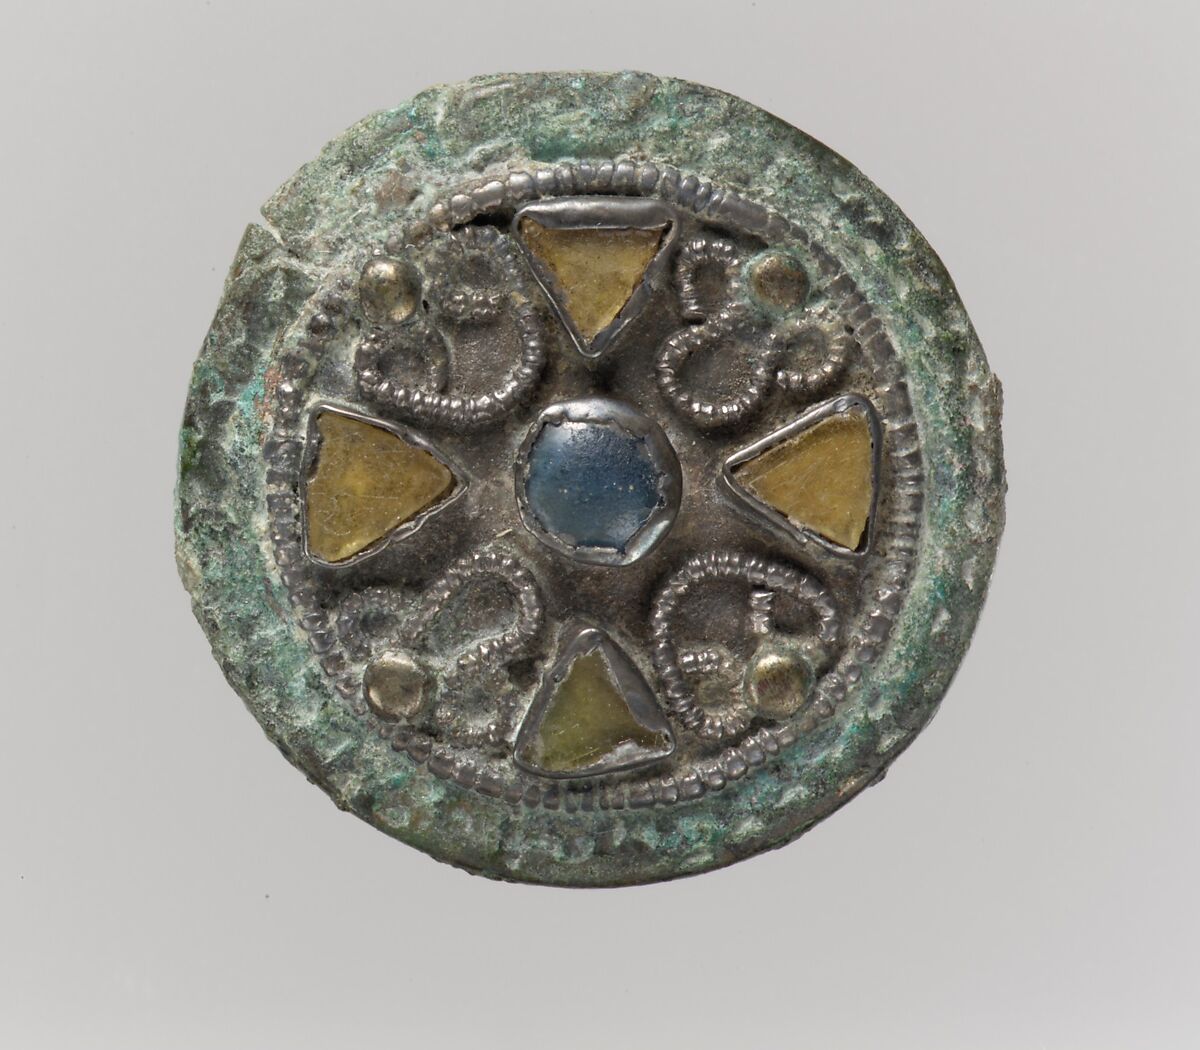 Disk Brooch, Silver-gilt, blue and pale amber glass, copper alloy support (gilt?), Frankish 